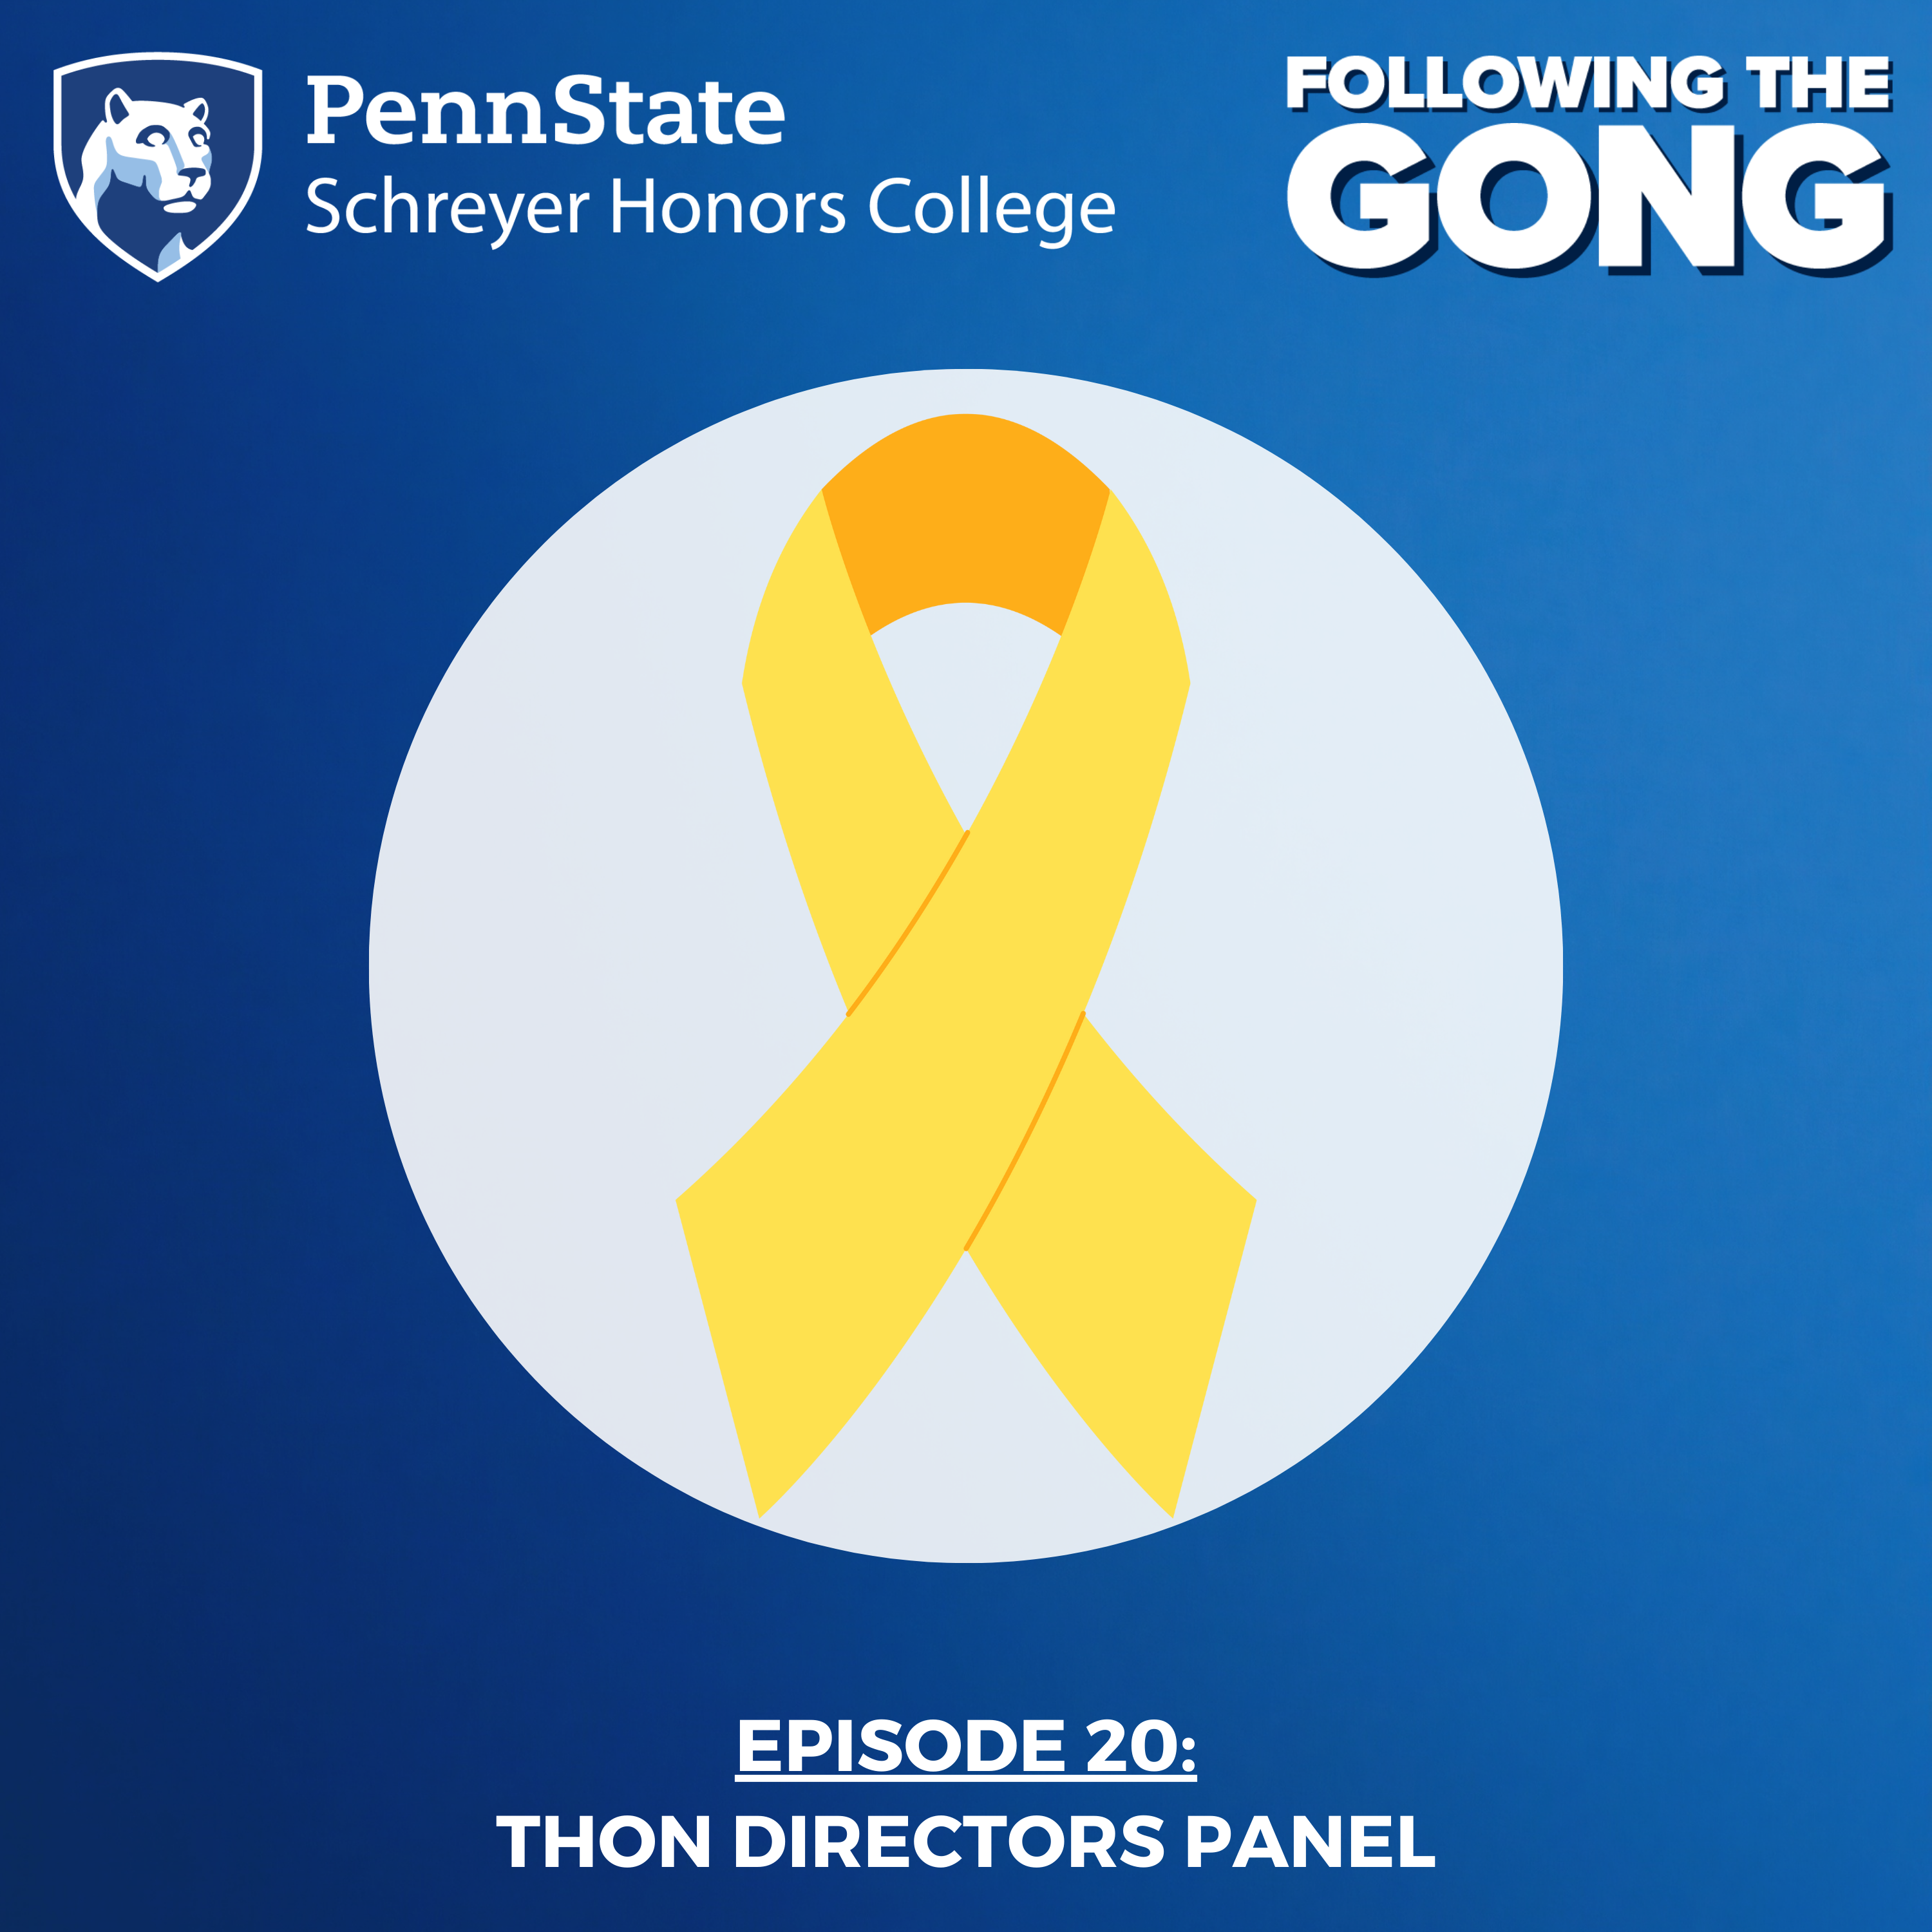 FTG 0020 - 46 for a Cure: THON Director Alumni Panel with Greg Tallman '10, Elaine Tanella '12, Charlotte Rose '13, & Dominic Mirabile '15 and Guest Co-Host Tessa Beauchat '23